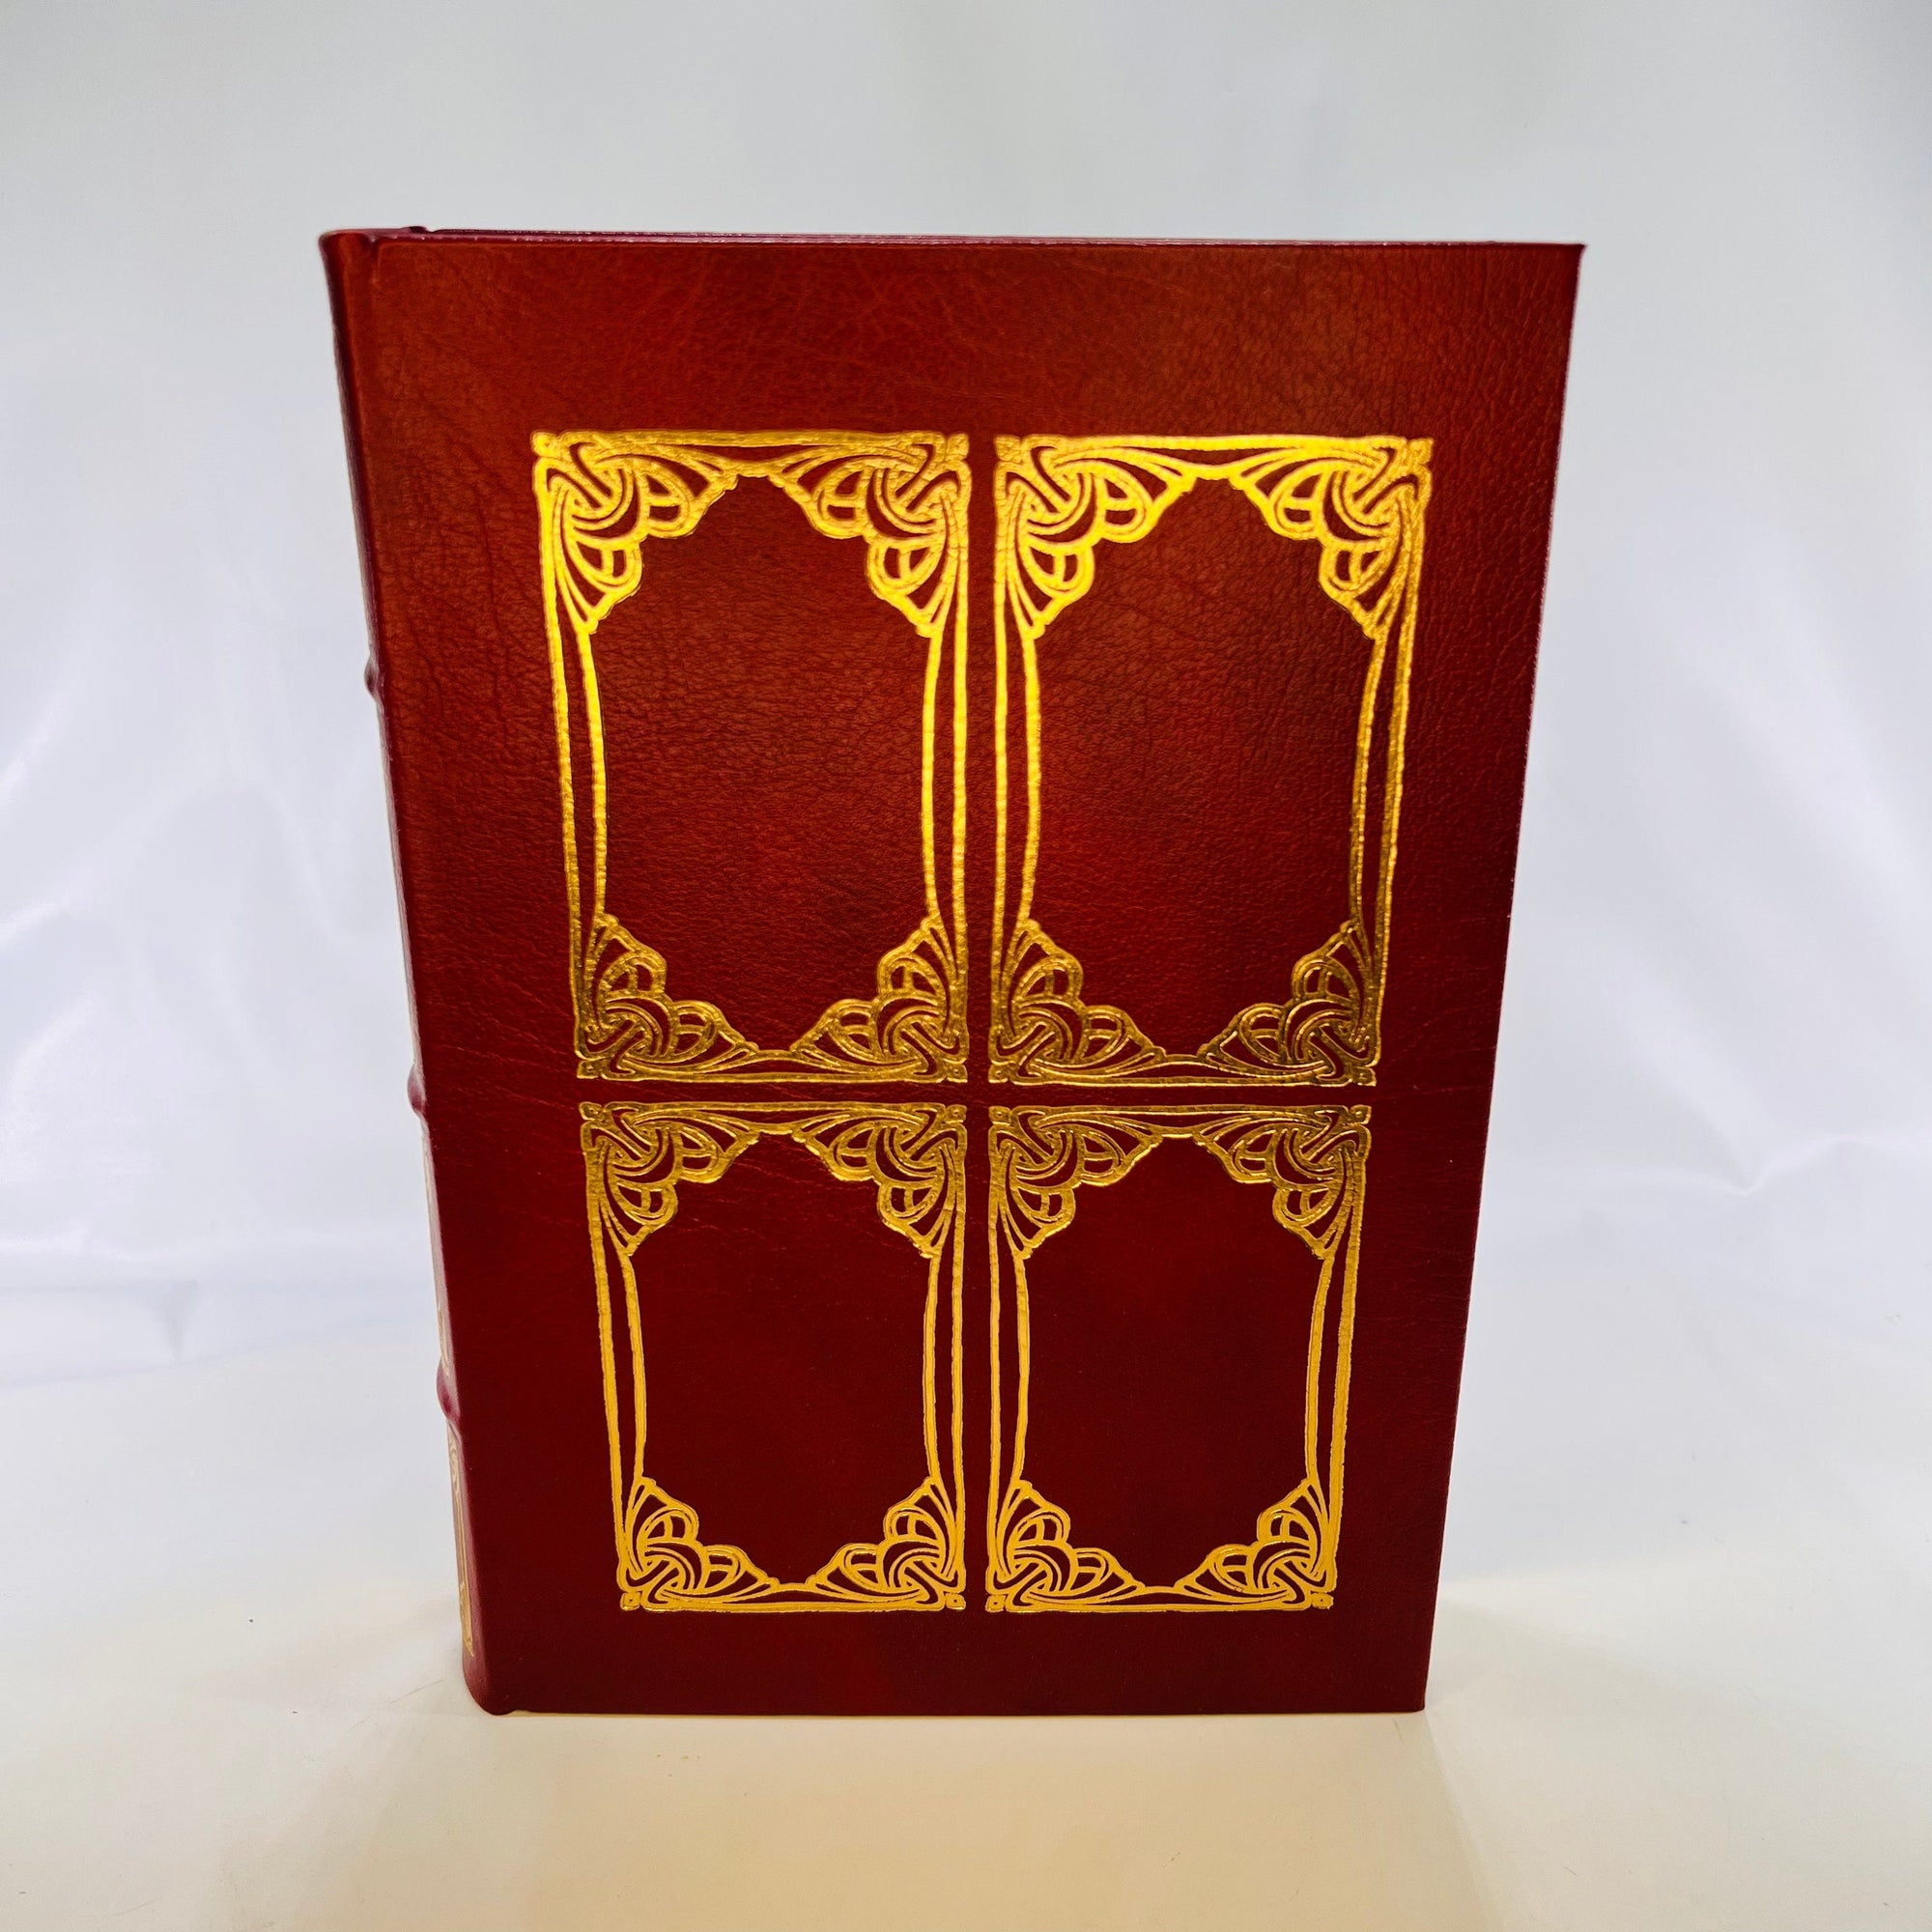 The Red and the Black by Marie-Henri Beyle Stendhal 1980 Easton Press part of the 100 Greatest Books